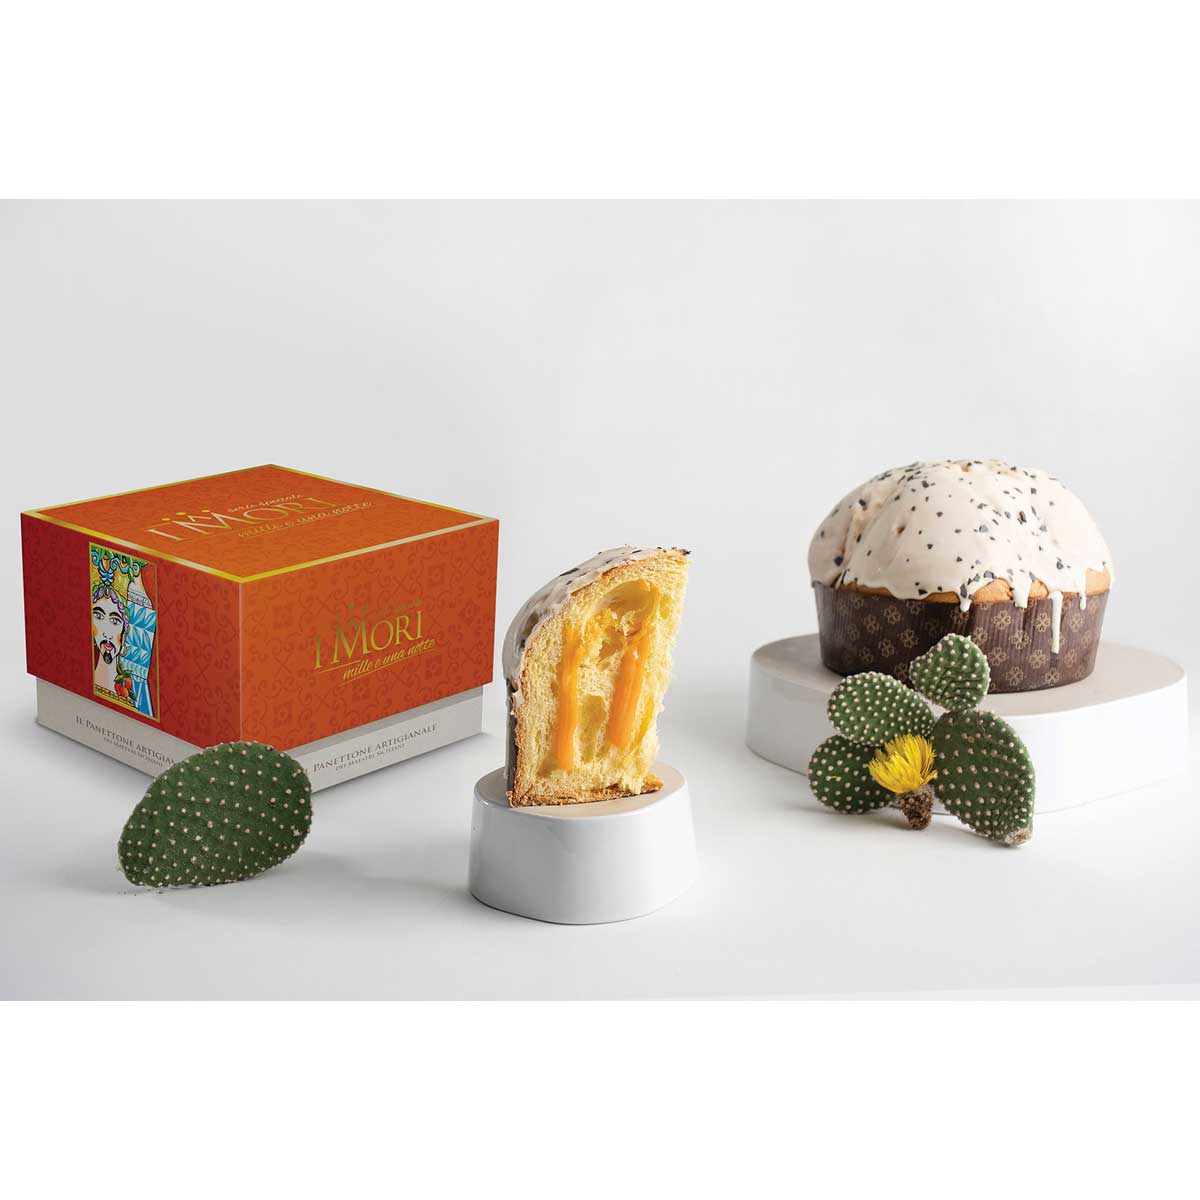 Wholesale i Mori Sicilian Prickly Pear Jam Panettone with Icing